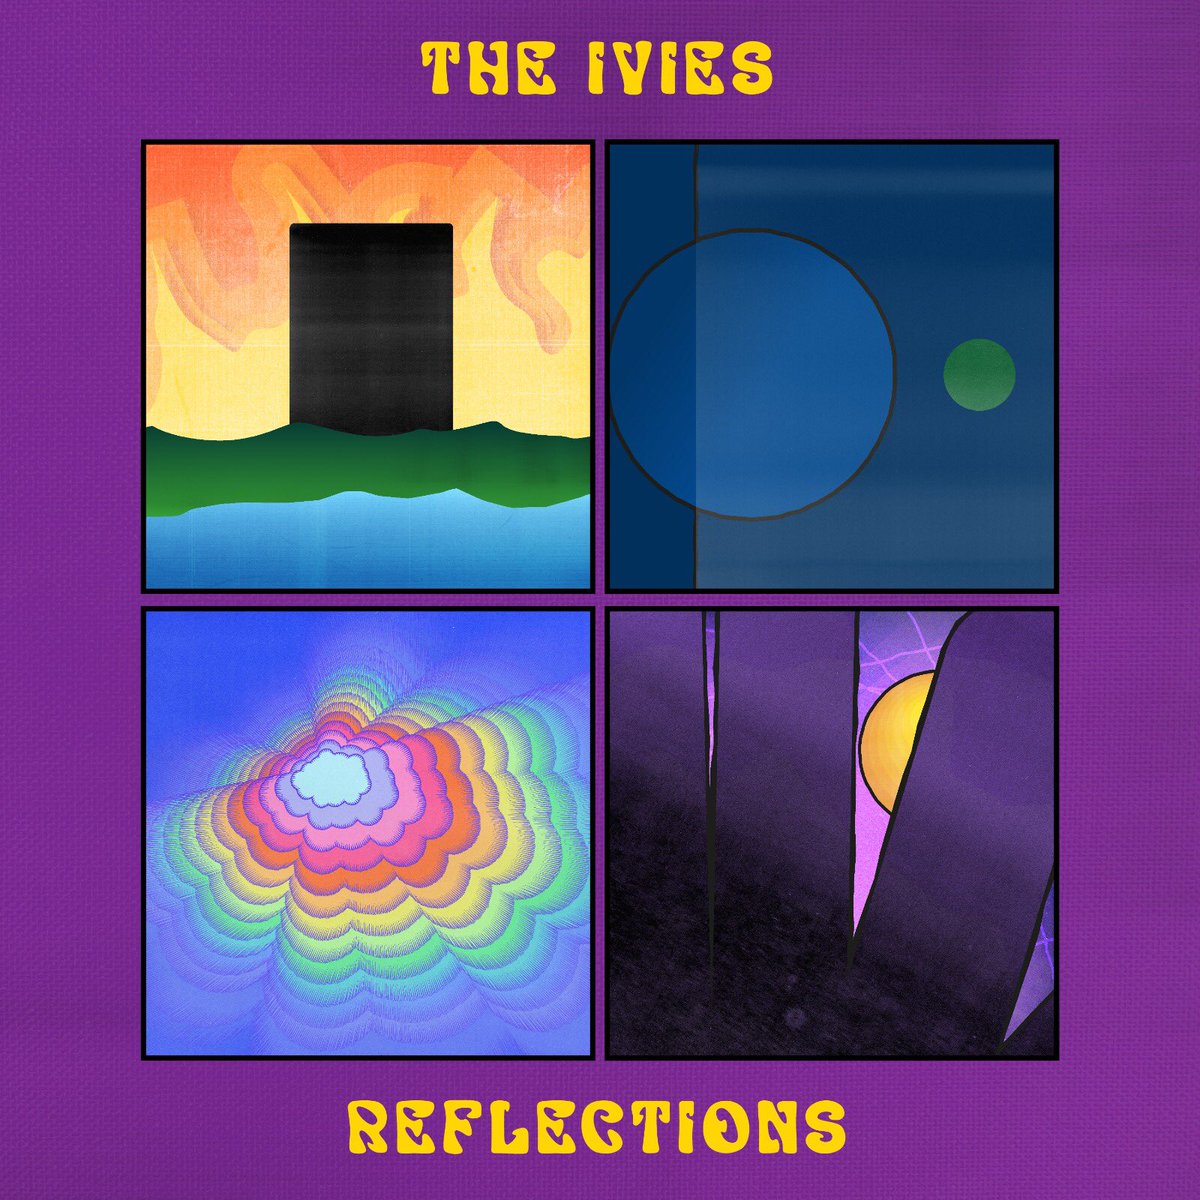 We are beyond excited to reveal the artwork of our debut EP!! Designed by Craig Boylan of @loominanceliv and CMD Studio.

‘Reflections’ will be available on all major streaming platforms on Friday 3rd February 2023.